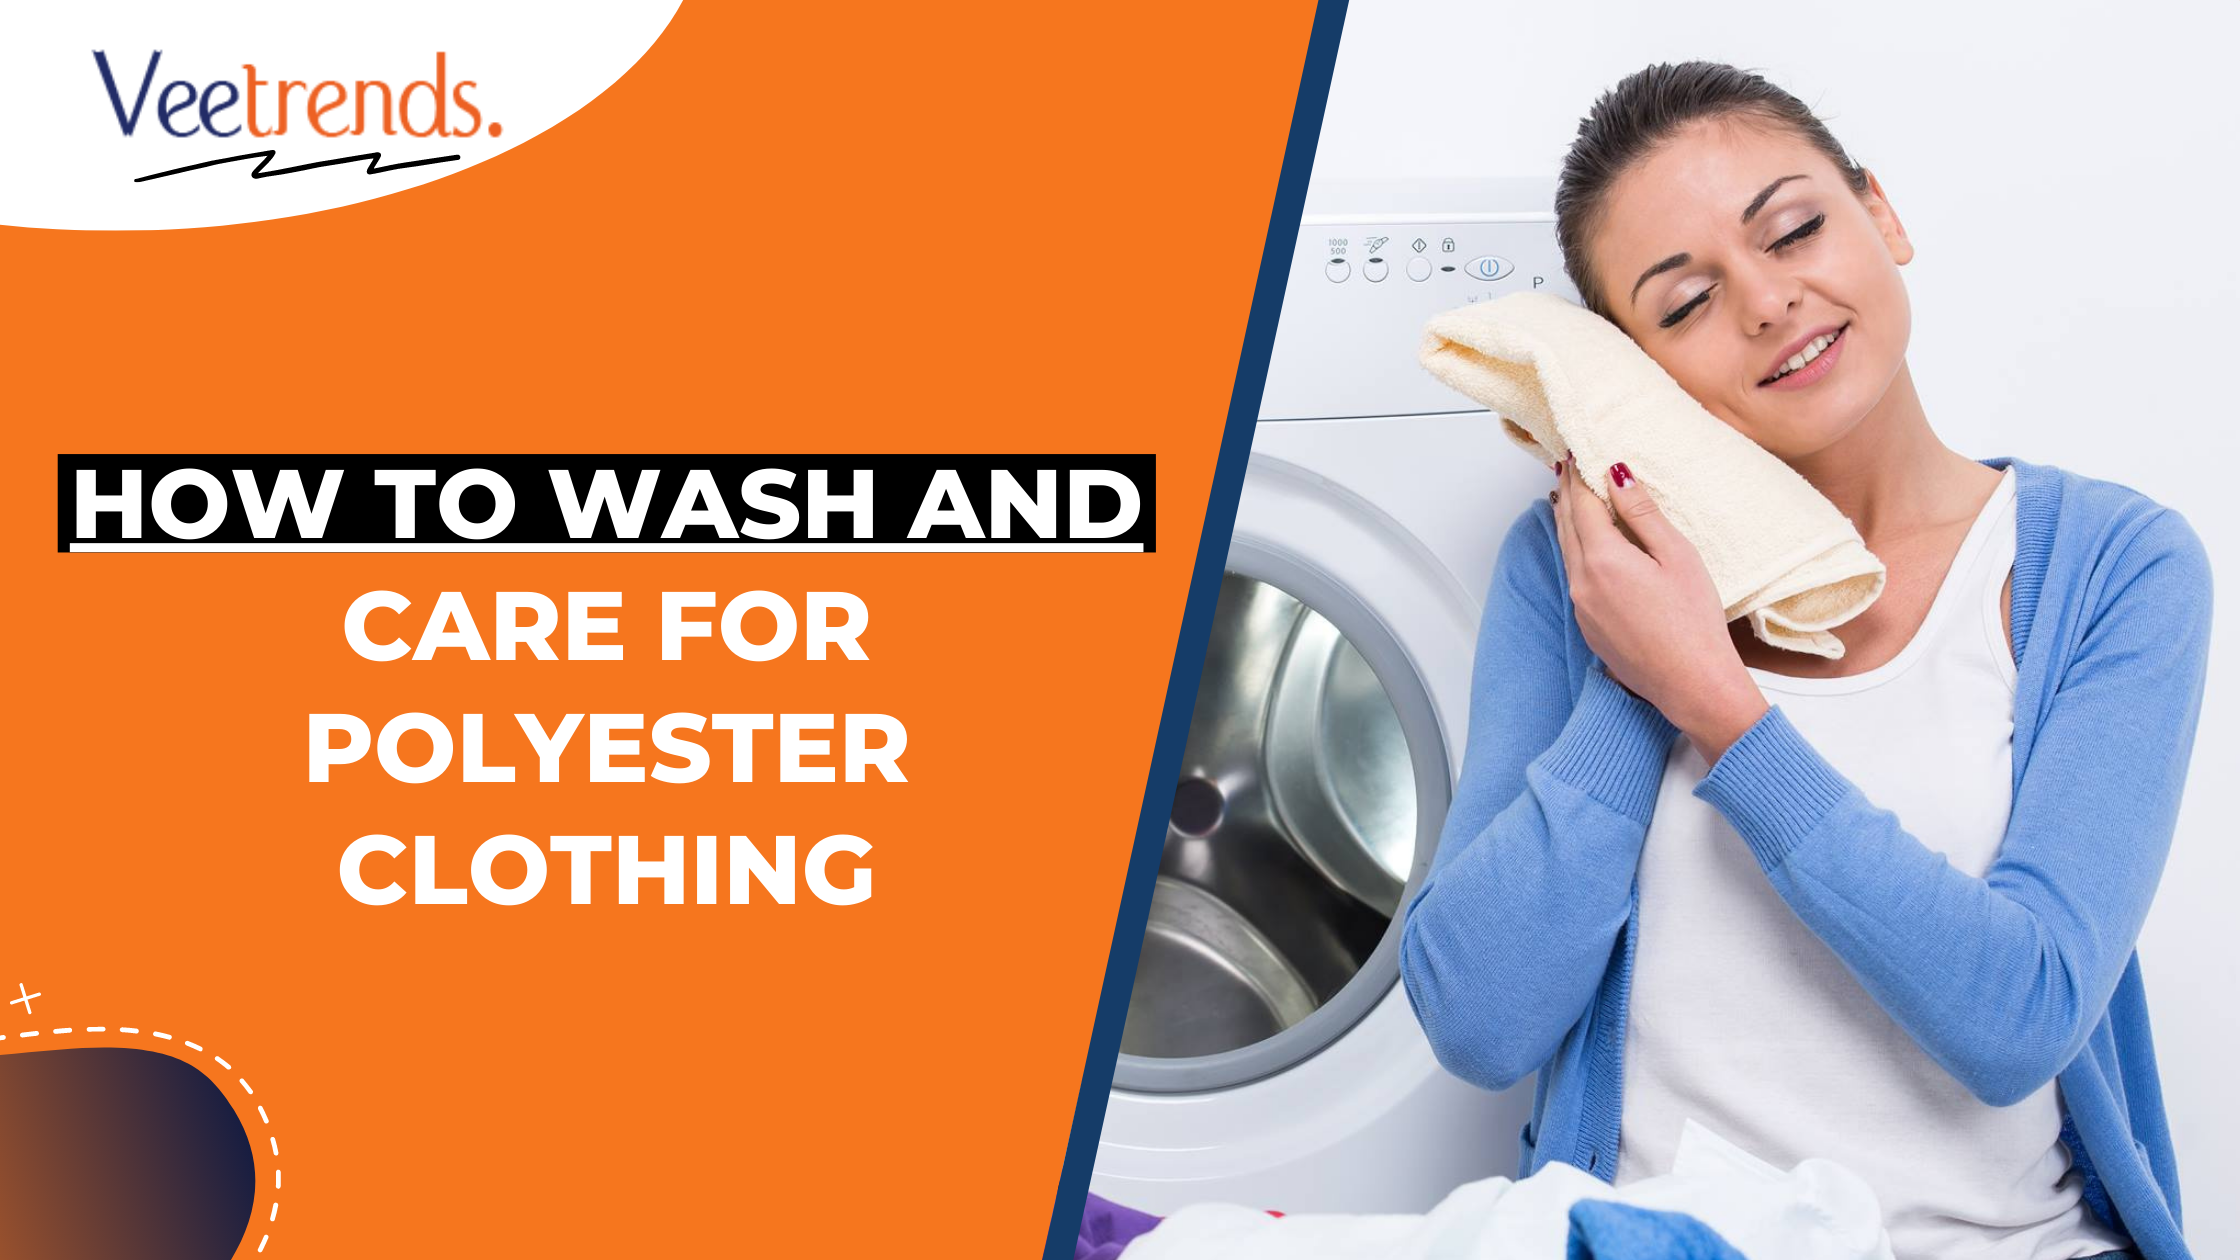 How to Wash and Care for Polyester Clothing